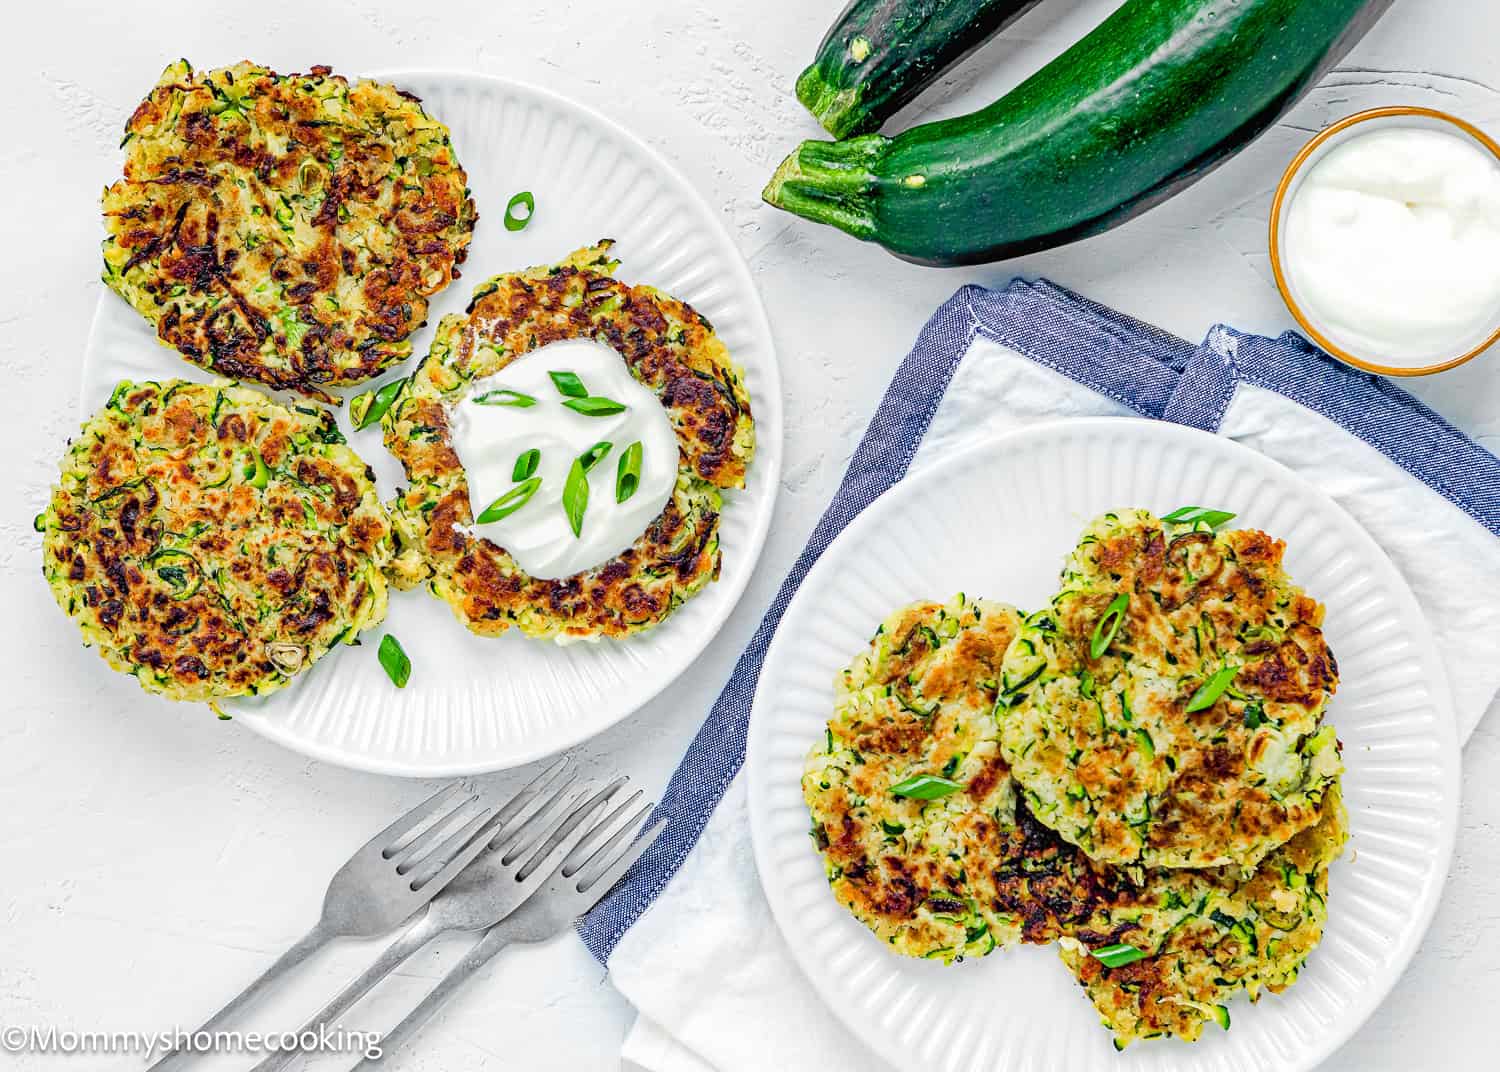 two plates with Eggless Zucchini Fritters over a white surface with a kitchen towel, forks, fresh zucchinis and a bowl with sour cream.